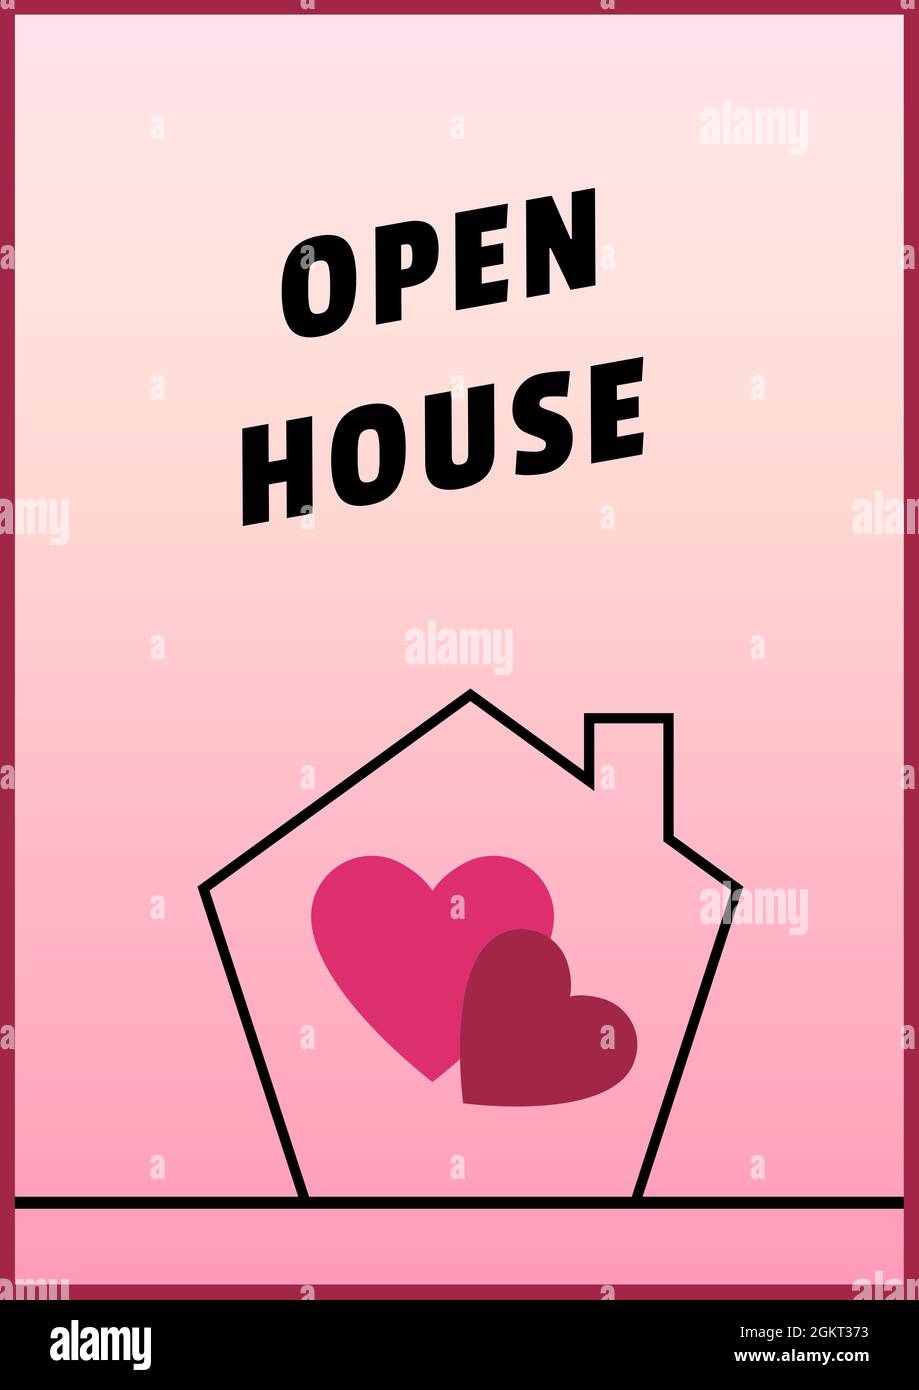 Digitally generated image of open house text over two hearts in a house icon on pink background Stock Photo